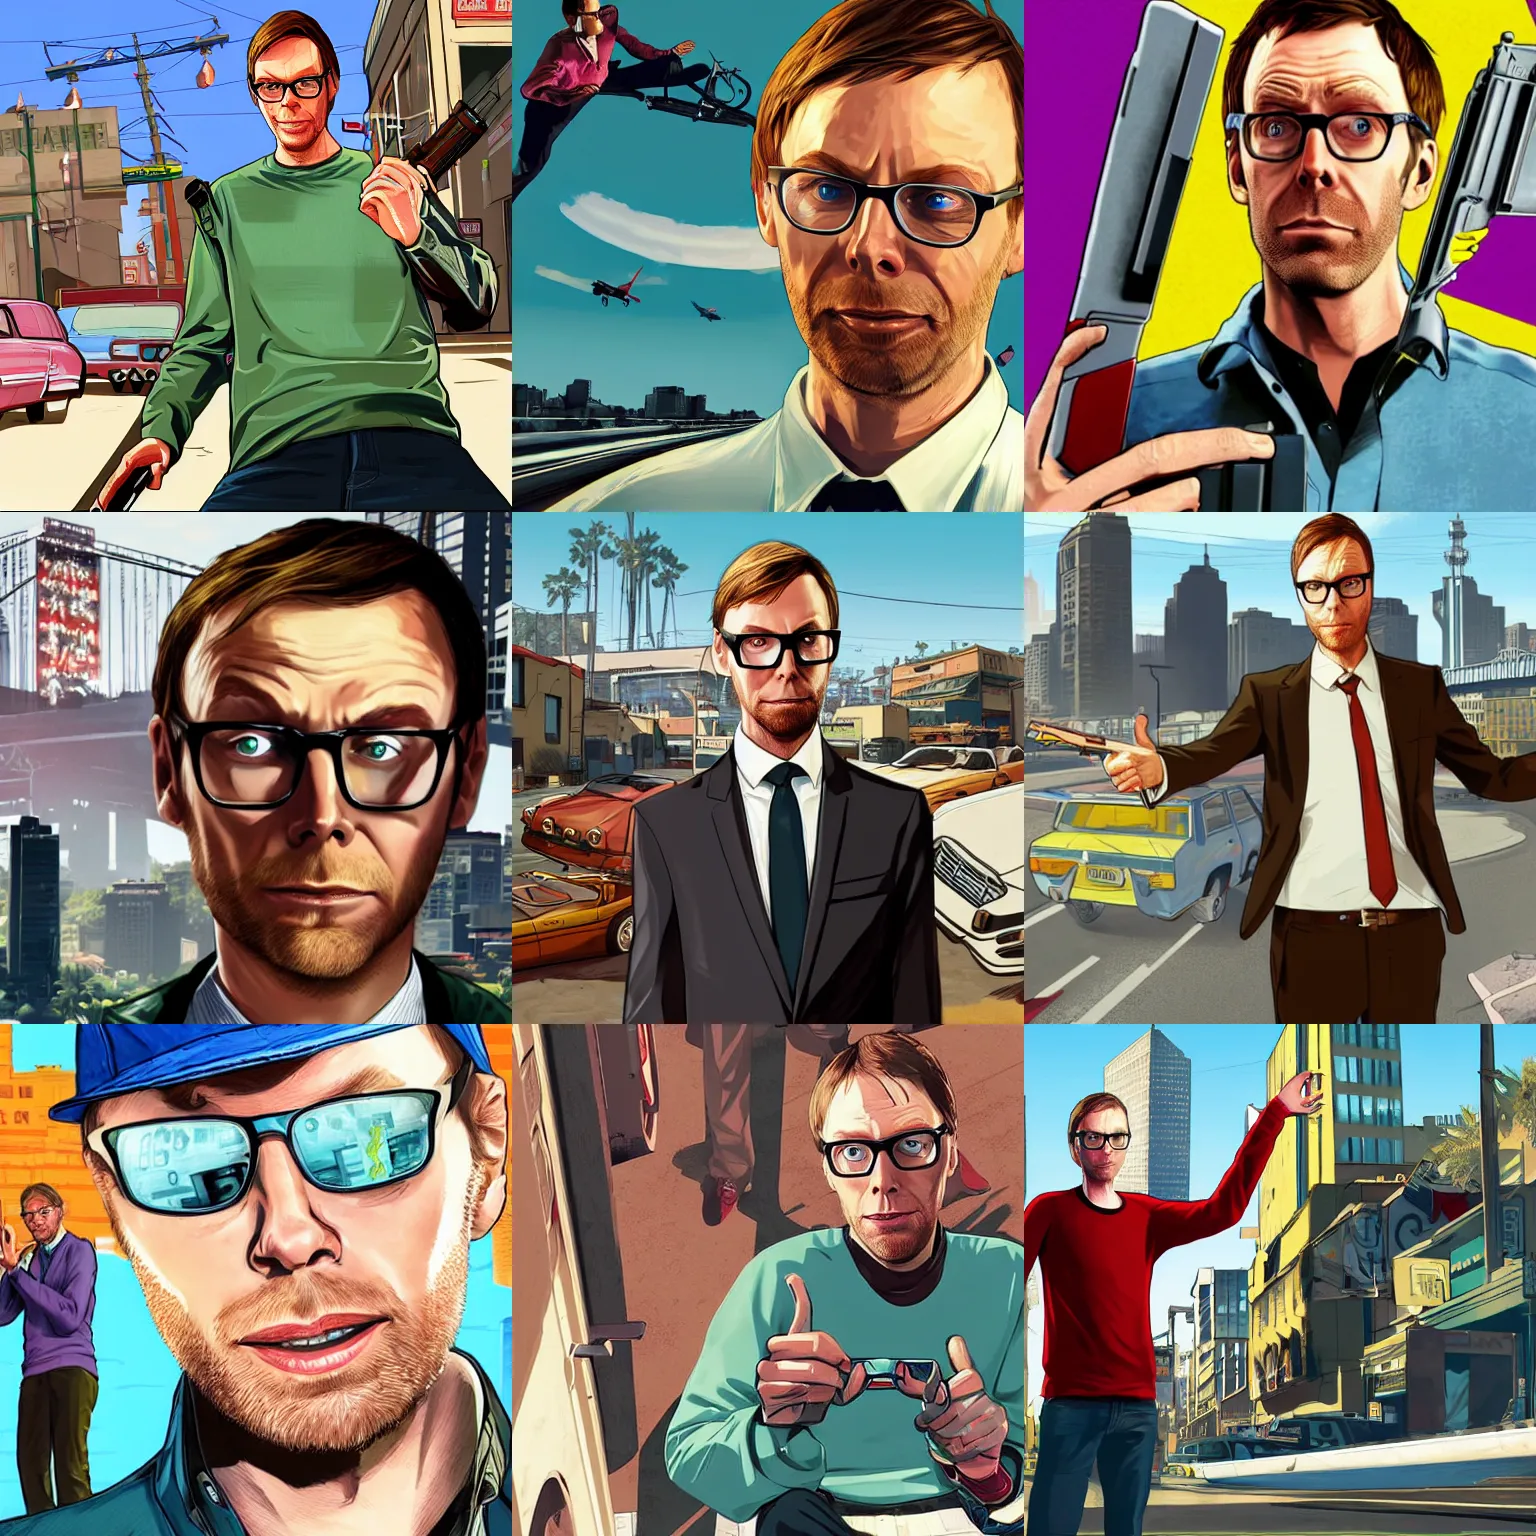 Prompt: stephen merchant in gta v promotional art by stephen bliss, no text